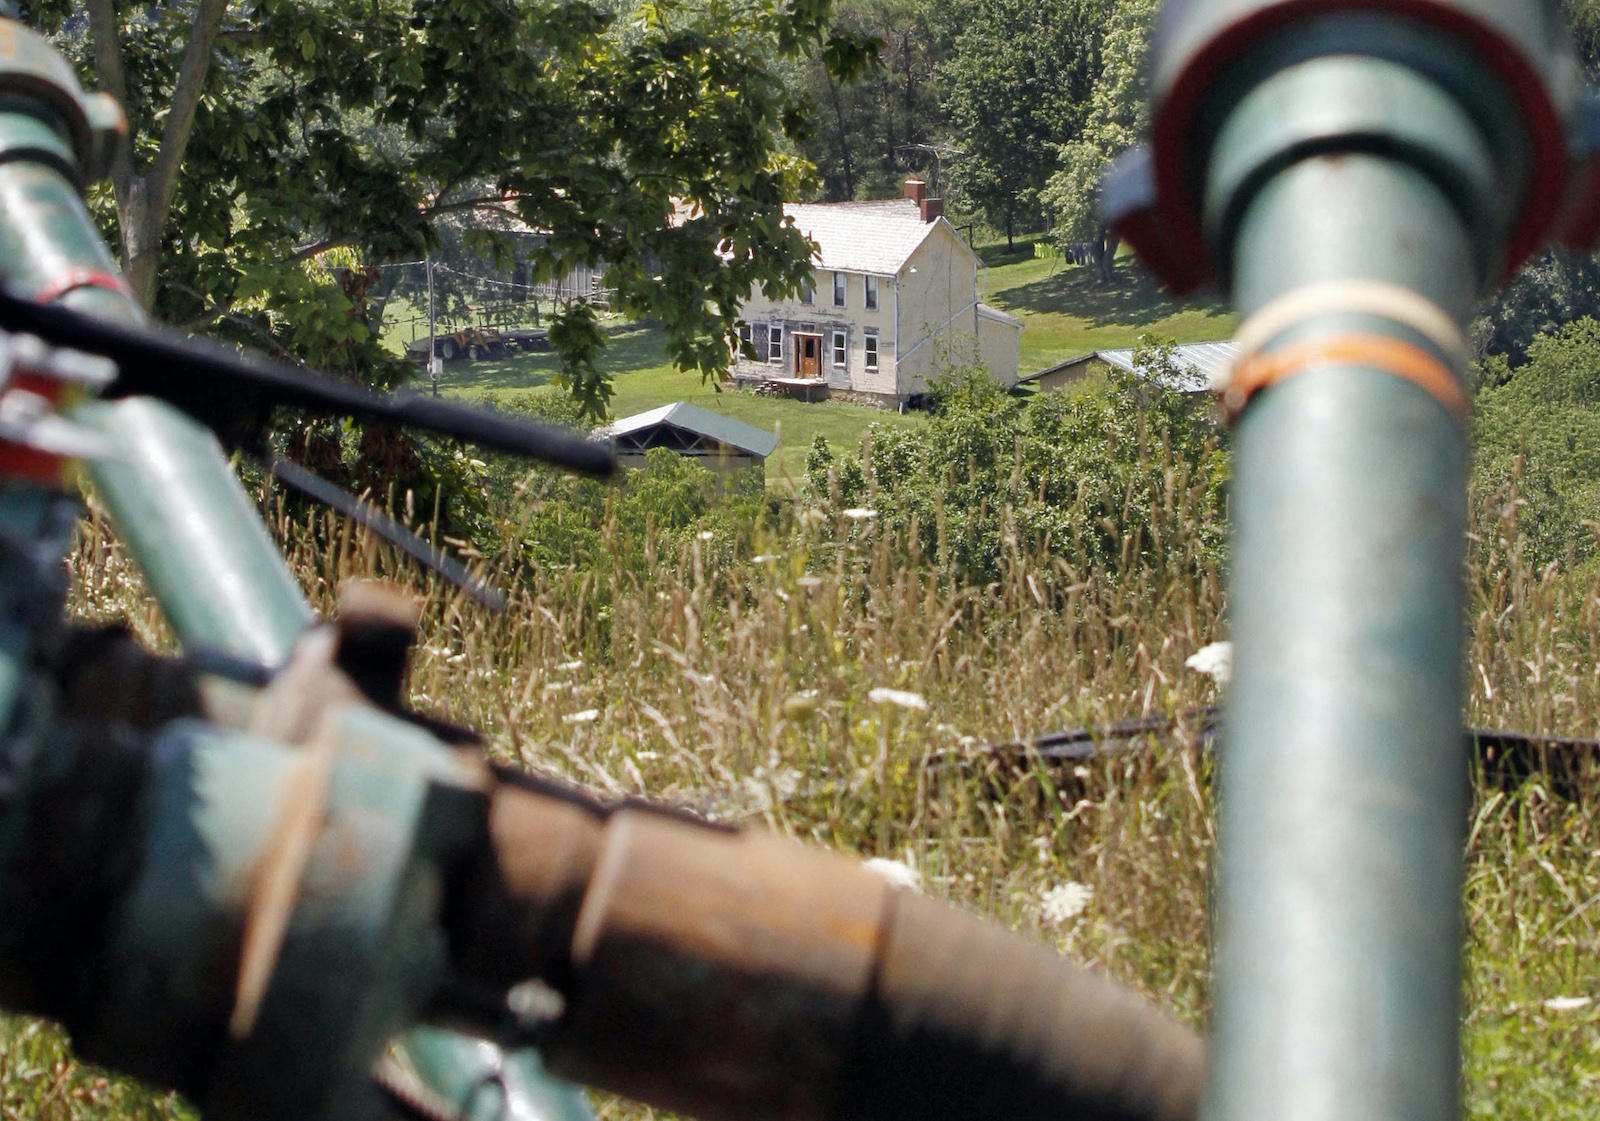 a farmhouse in the background, pipes in the foreground